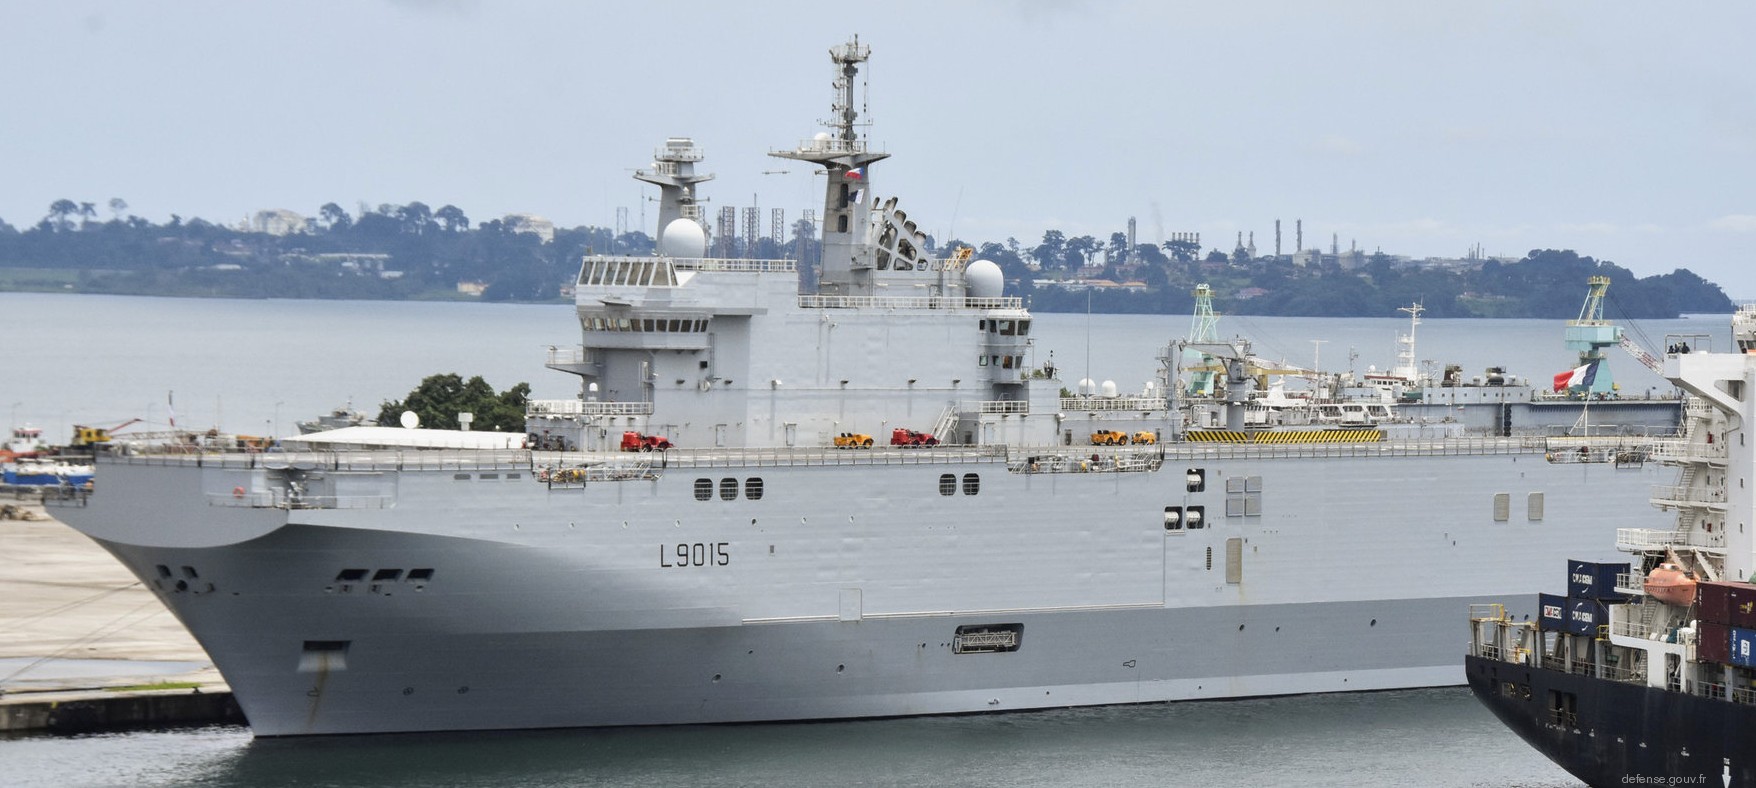 l-9015 fs dixmude mistral class amphibious assault command ship bpc french navy marine nationale 19